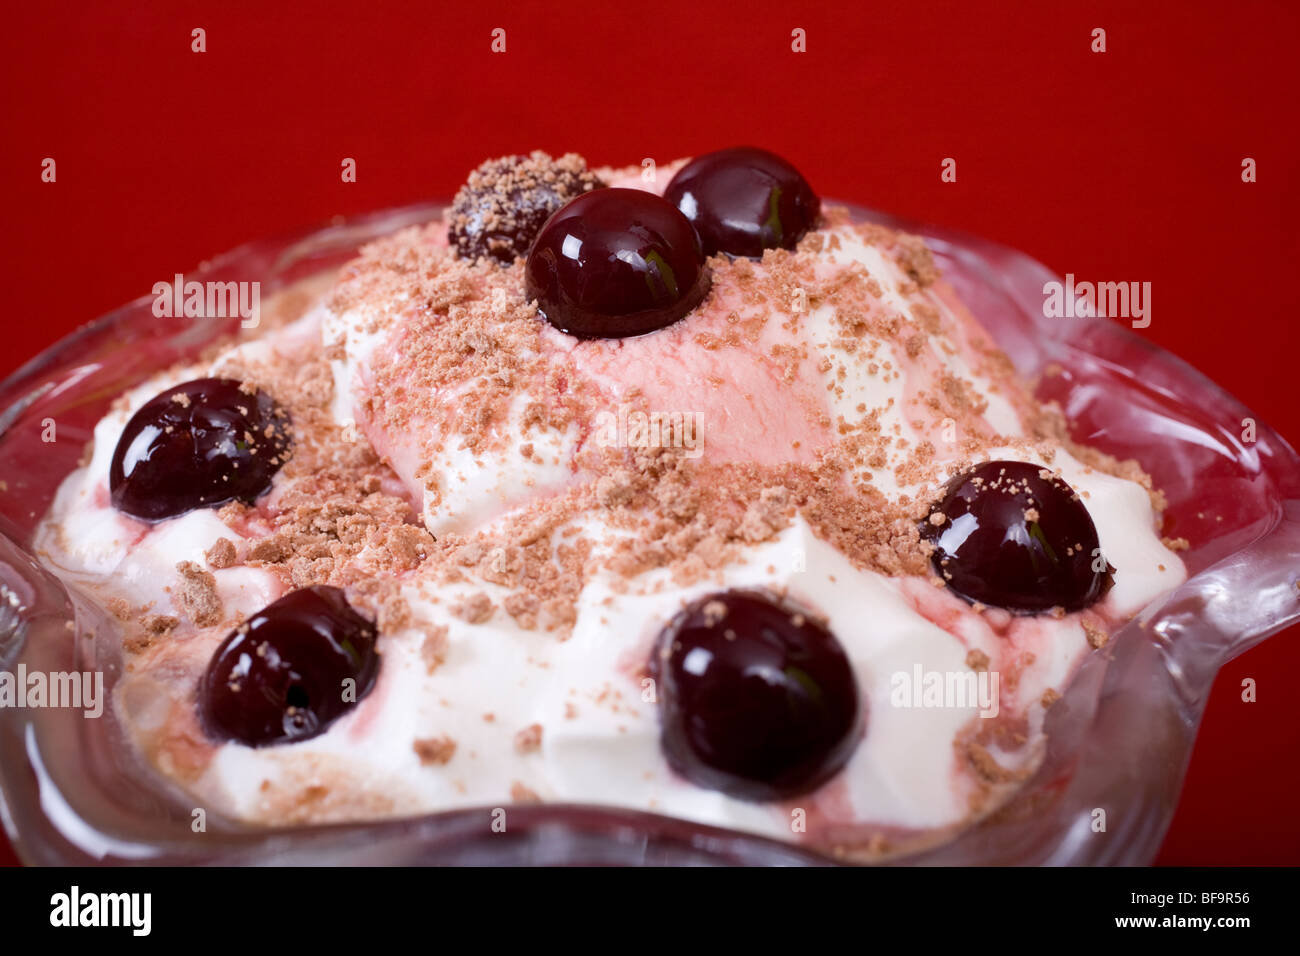 Chocolate ice-cream sundae with chocolate flake and a glazed cherry on top, served in a pretty glass. Stock Photo